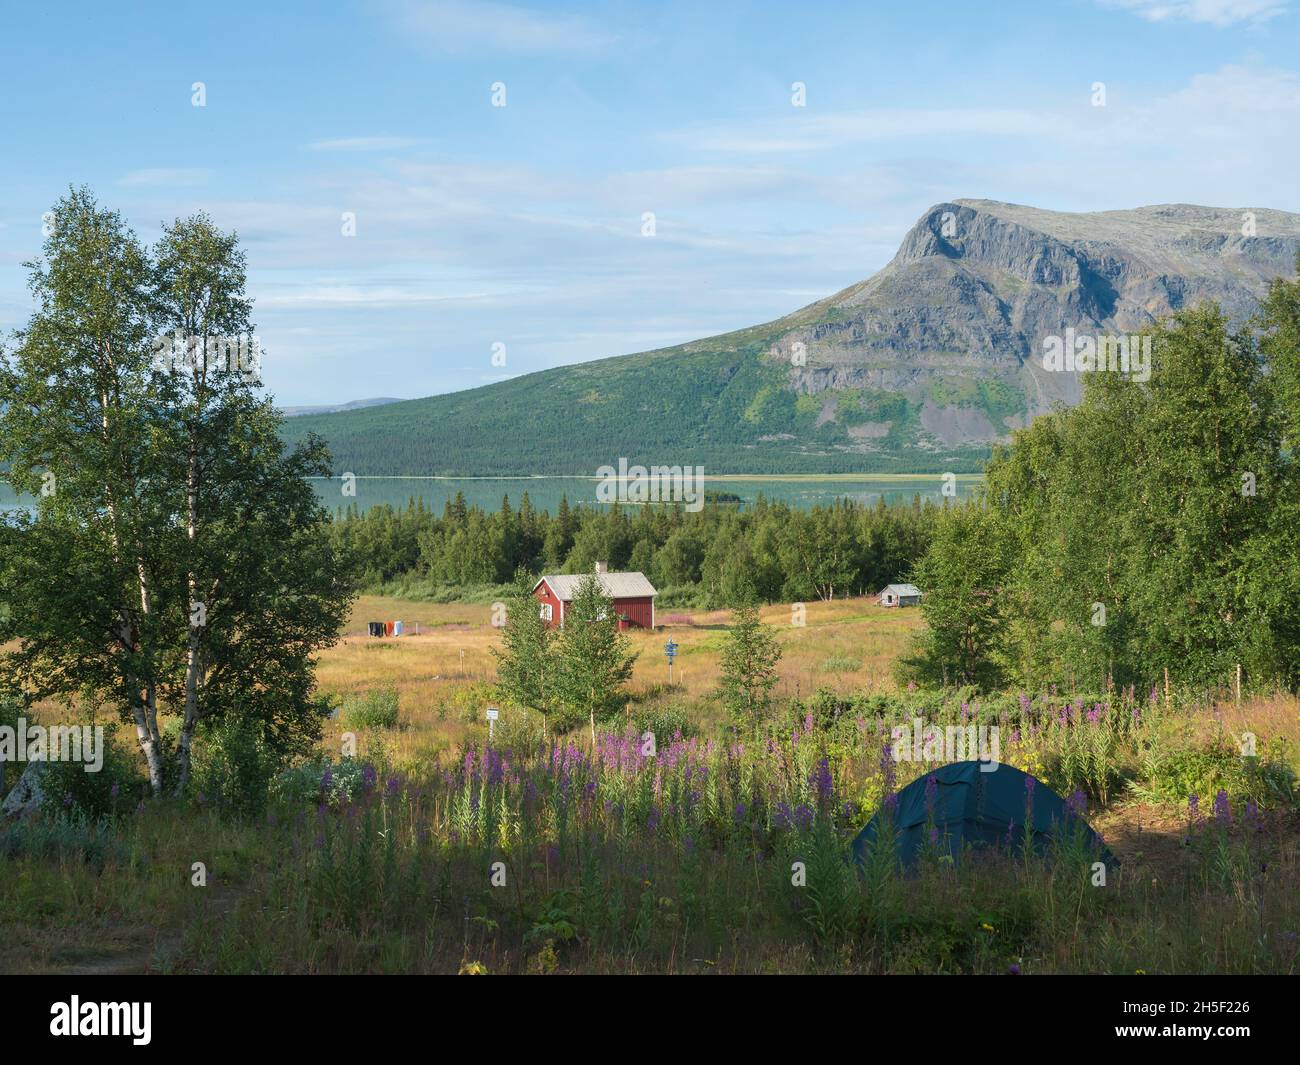 Camping site of Aktse Fjallstuga STF mountain cabin with small tent, hut, pink willowherb fowers, Laitaure lake, green hills and spruce birch trees Stock Photo